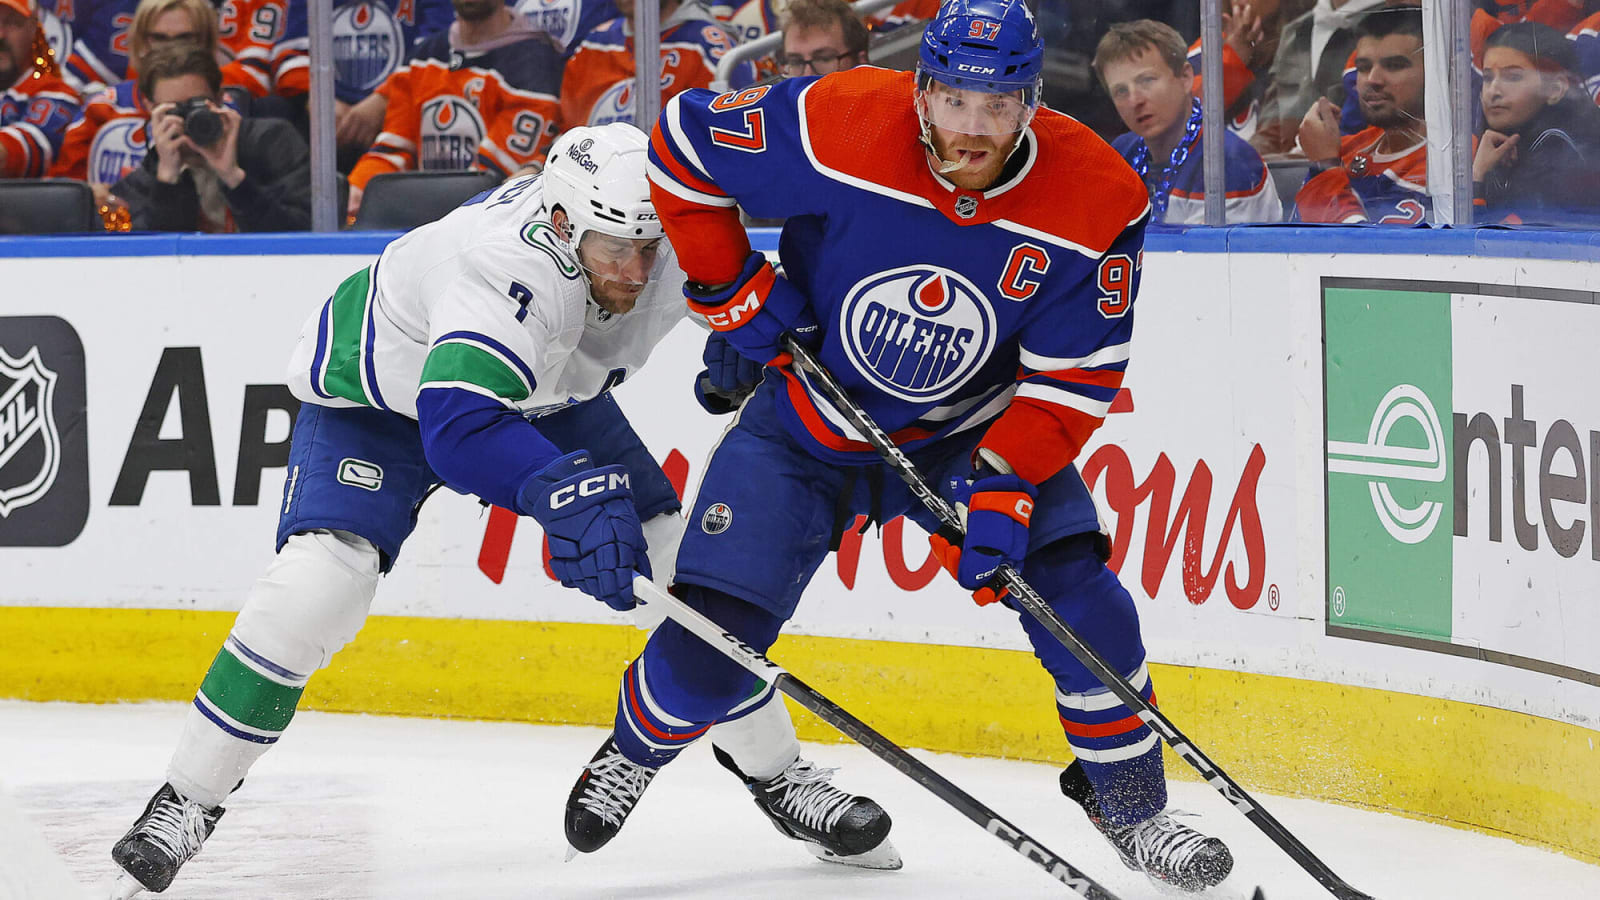 Edmonton Oilers vs. Vancouver Canucks Game 3: A Tactical Review